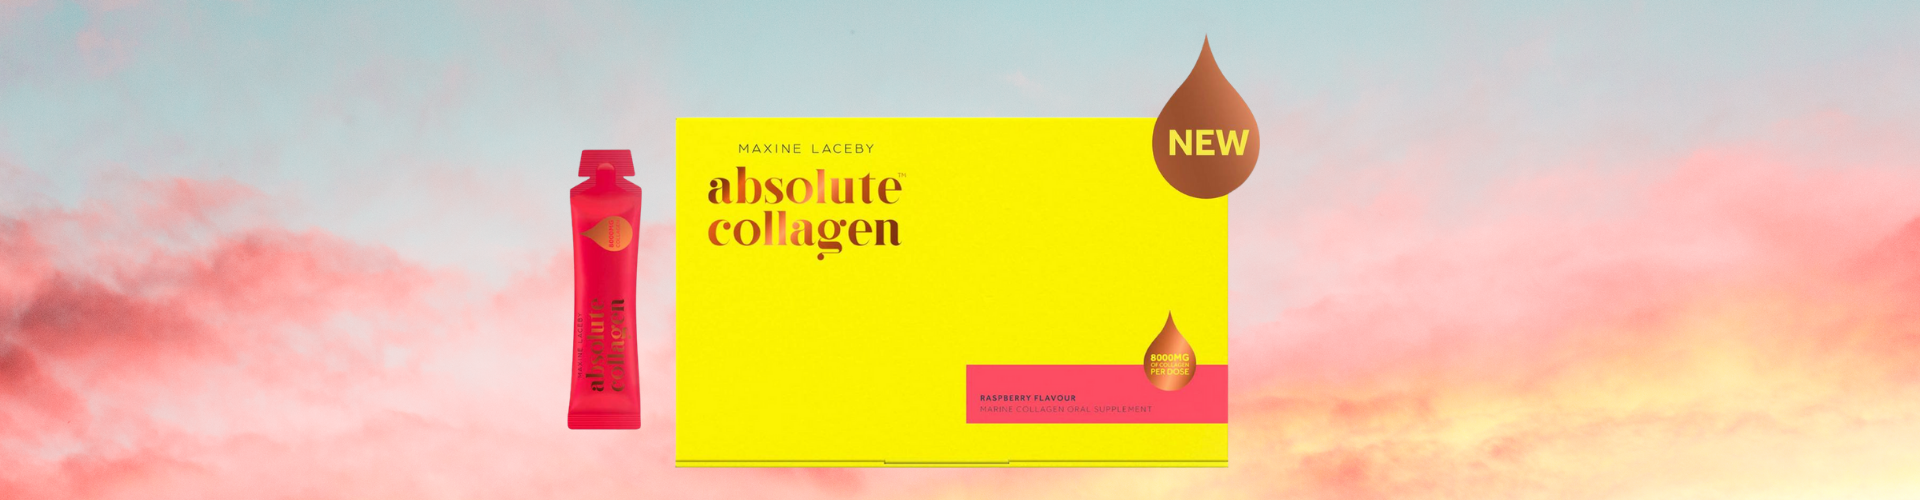 absolute collagen review box with a red sky in the background